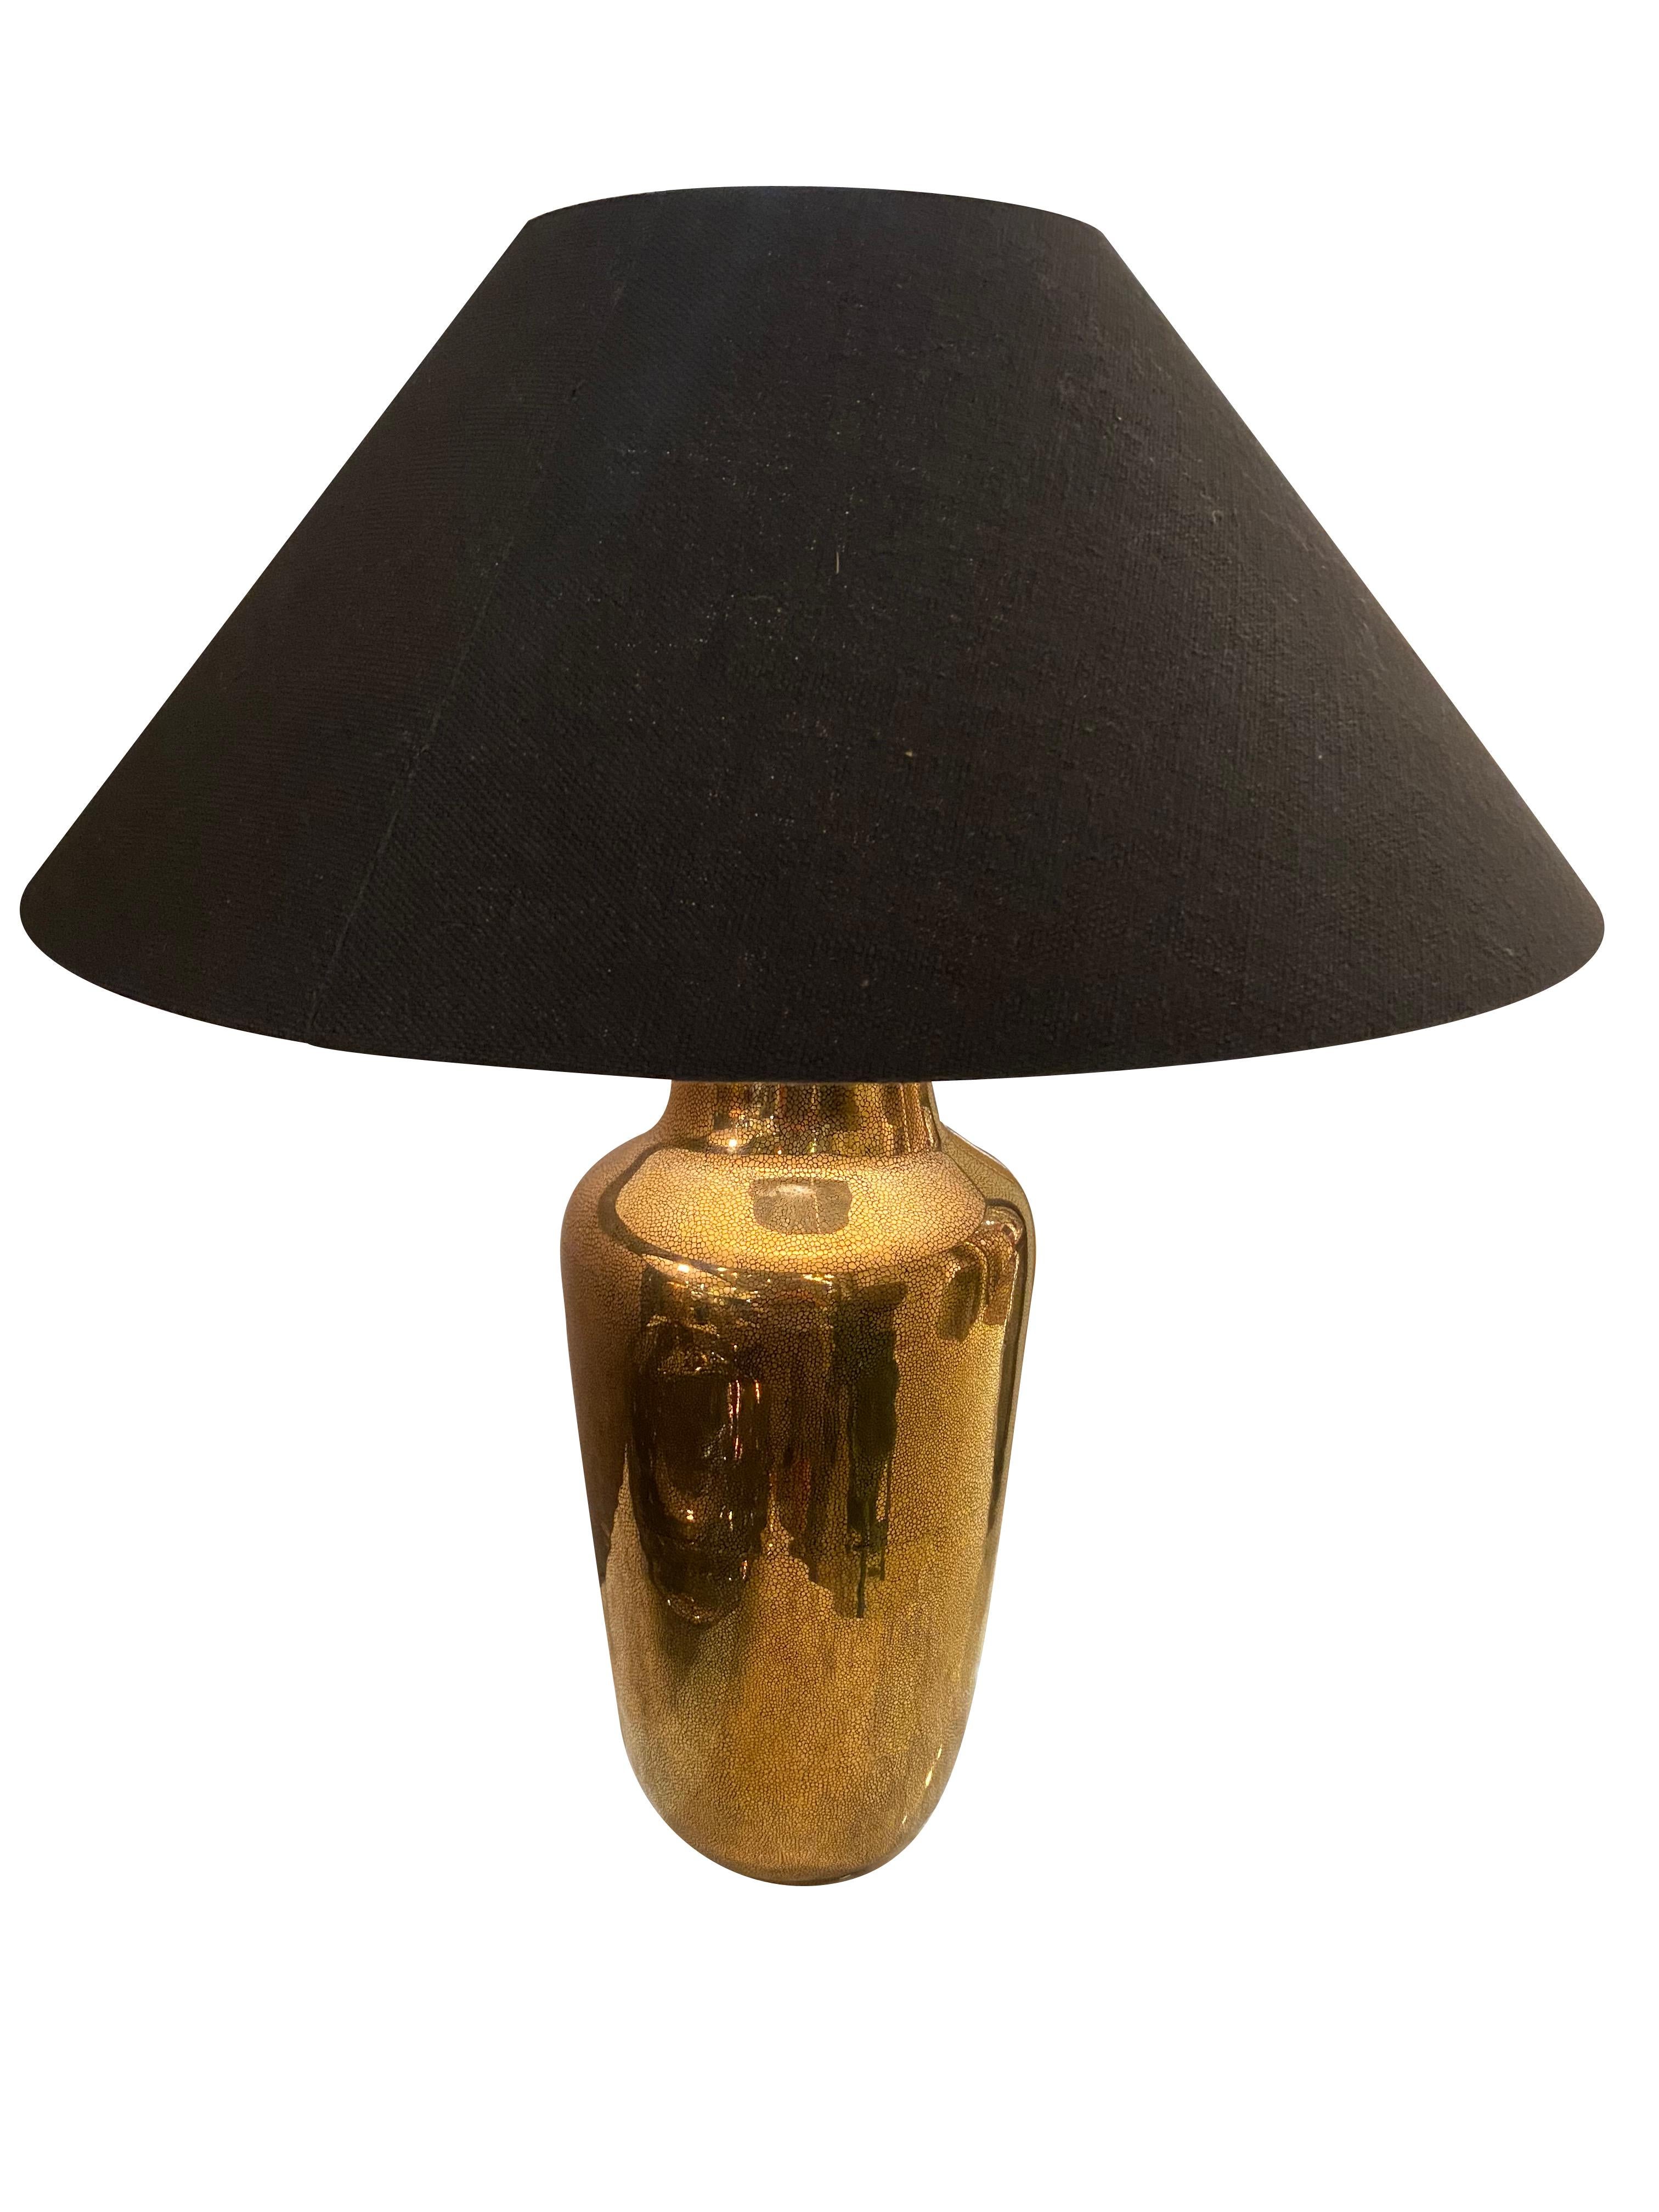 Contemporary Chinese pair of gold faux shagreen lamps. The faux shagreen design is affixed to a porcelain base.
The lamp is designed in a ginger jar shape.
Belgian black linen shade with gold interior.